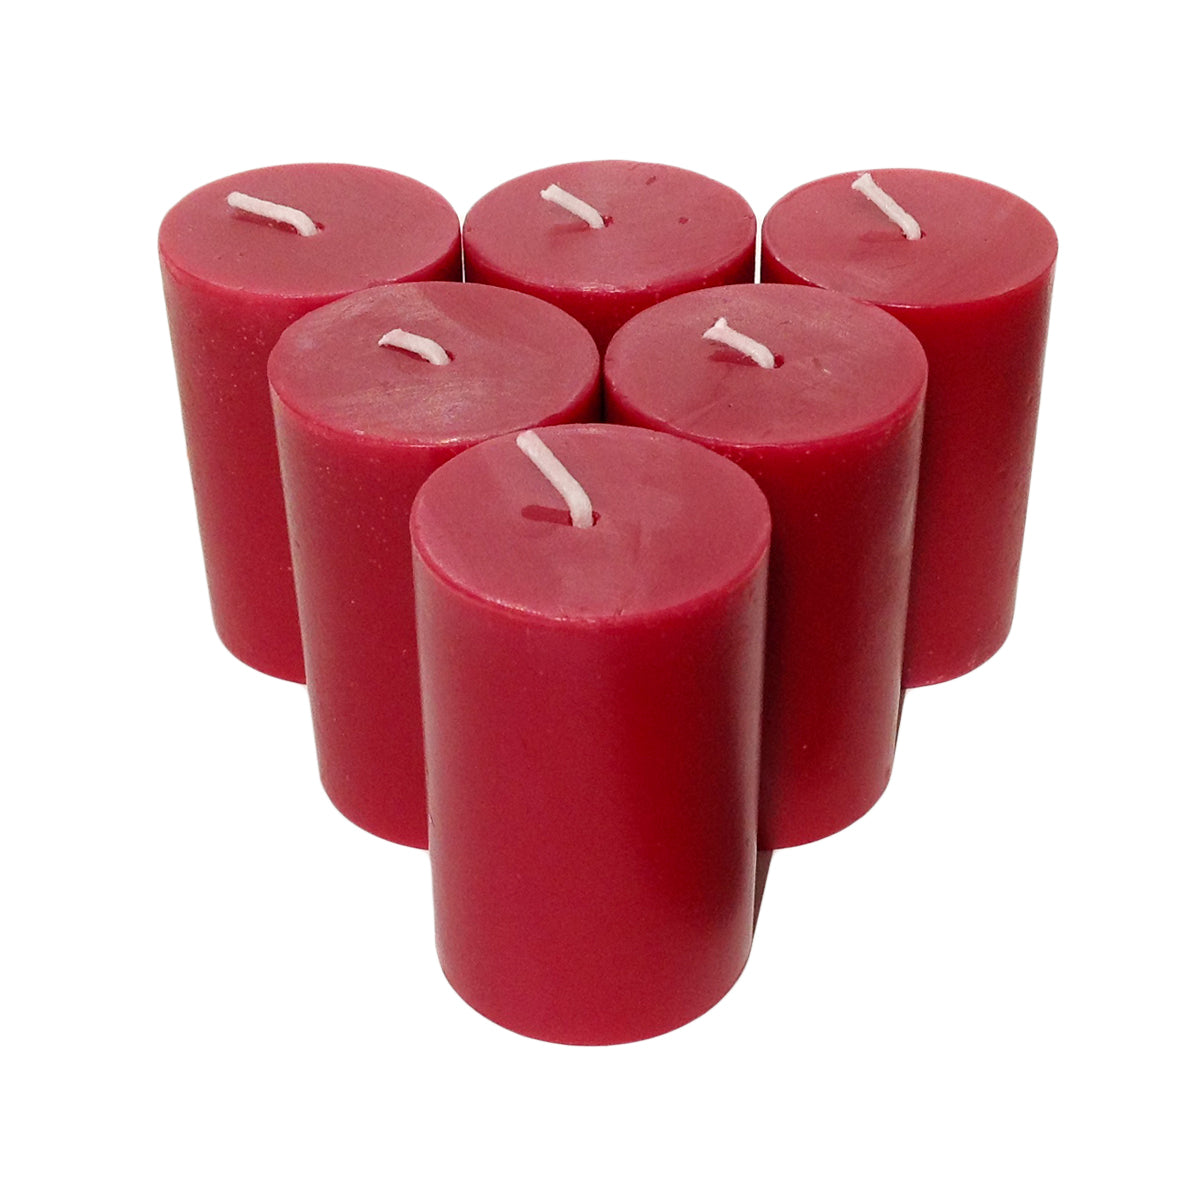 Burgundy Pillar Candles size 7 x 4.3cm - Pack of 6